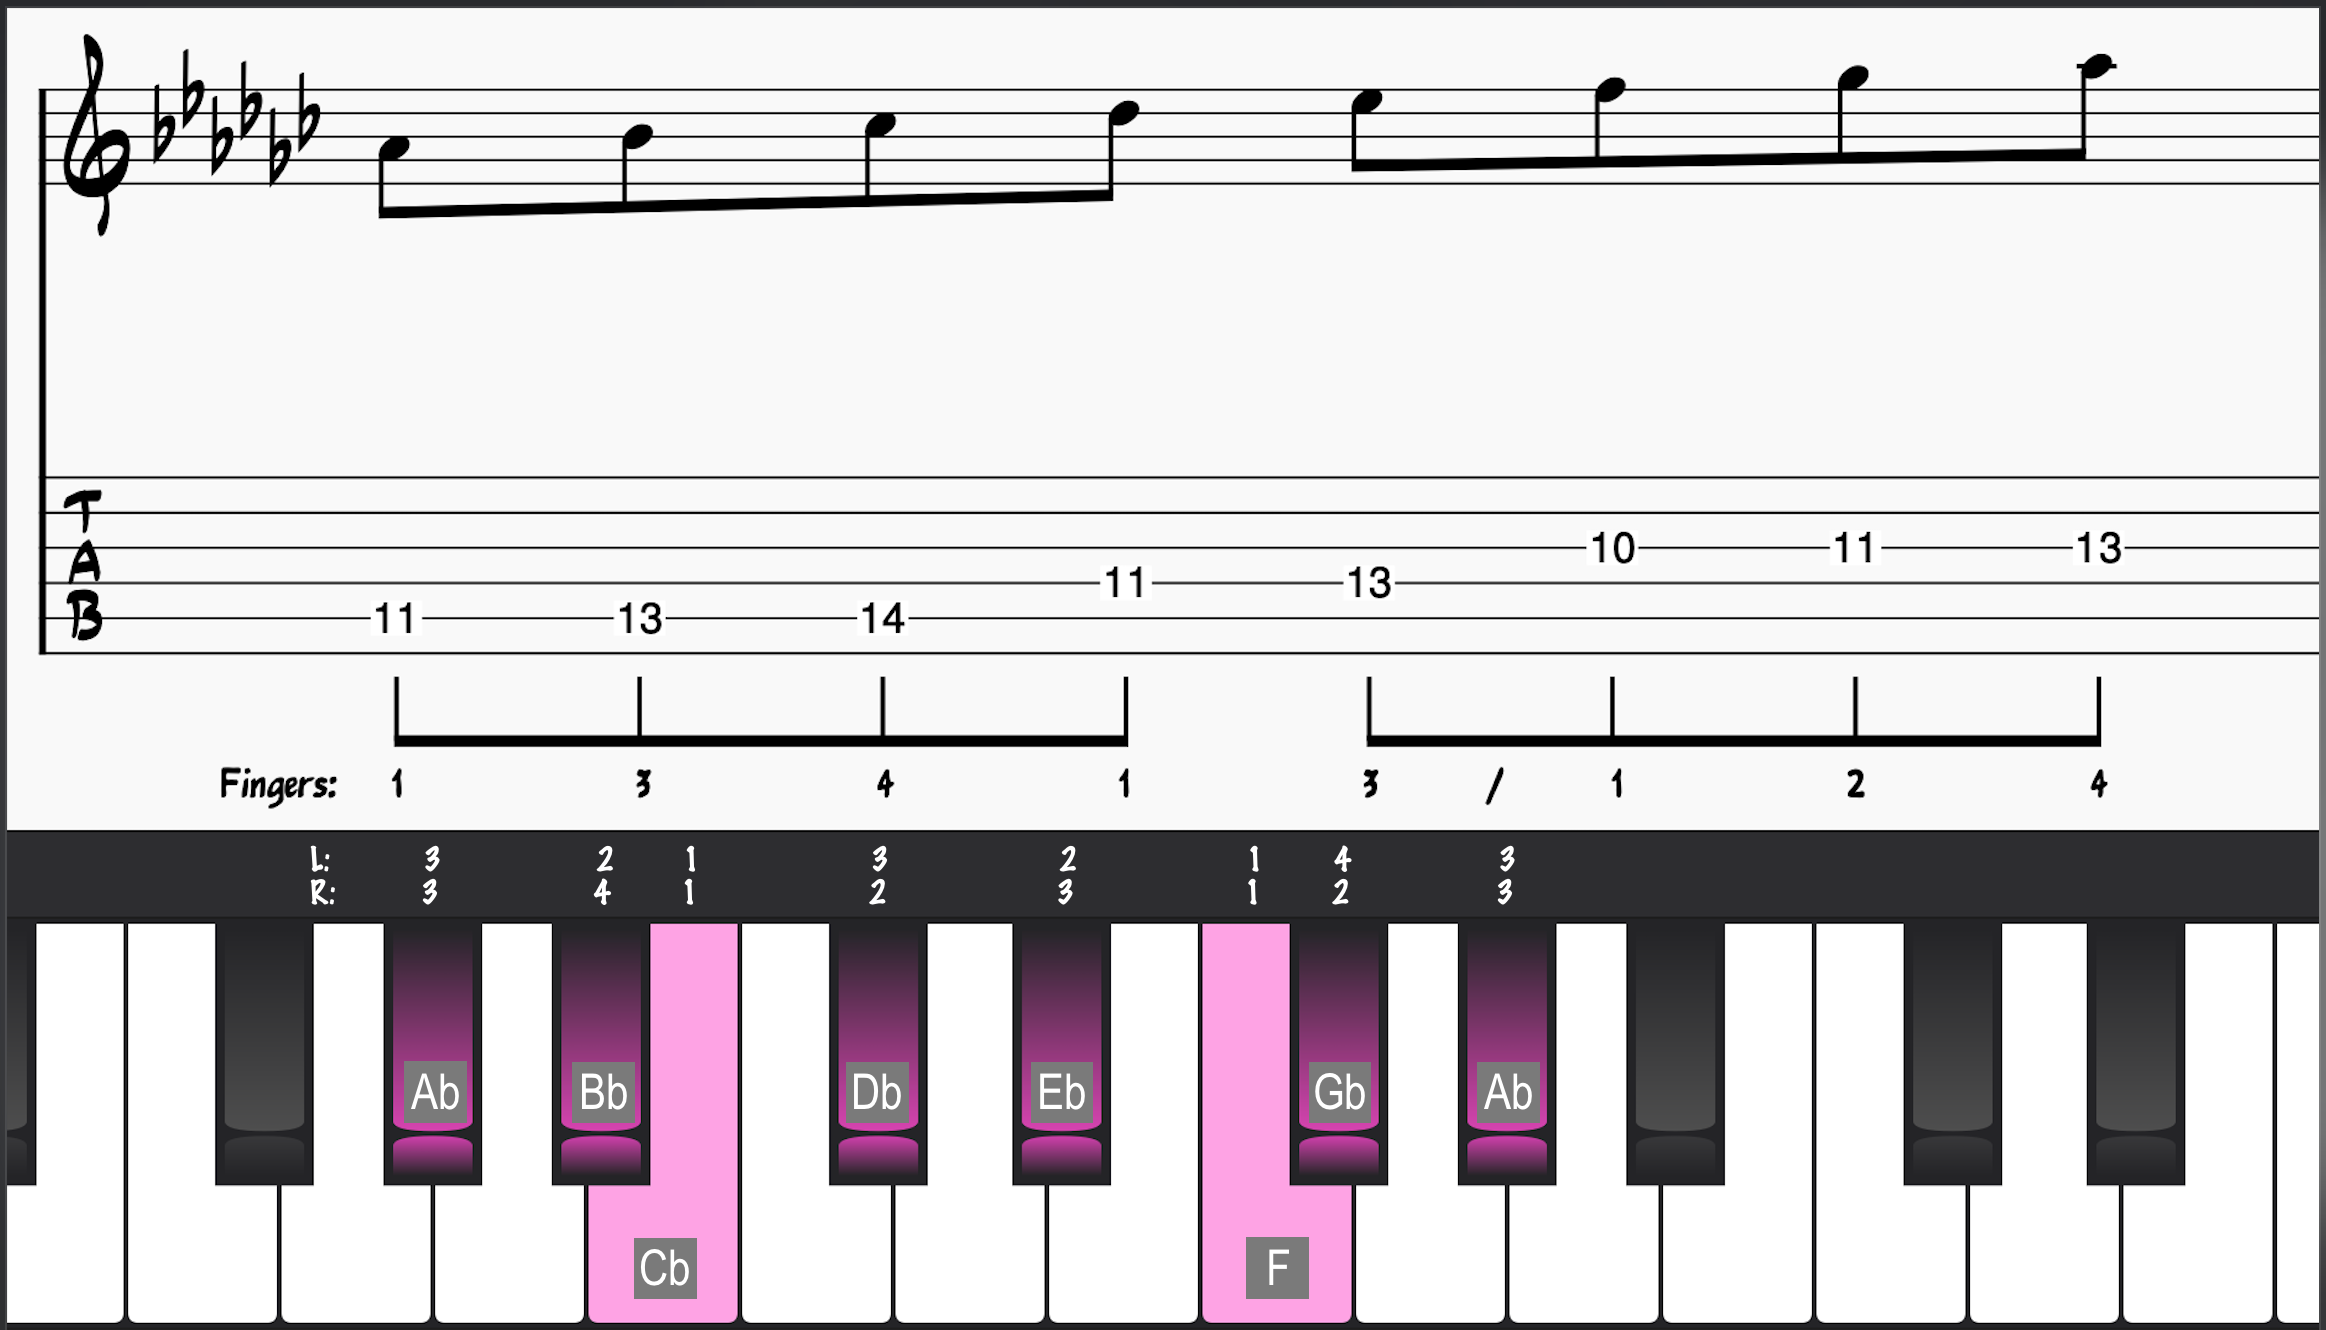 Ab Dorian Mode with Guitar and Piano Fingerings 